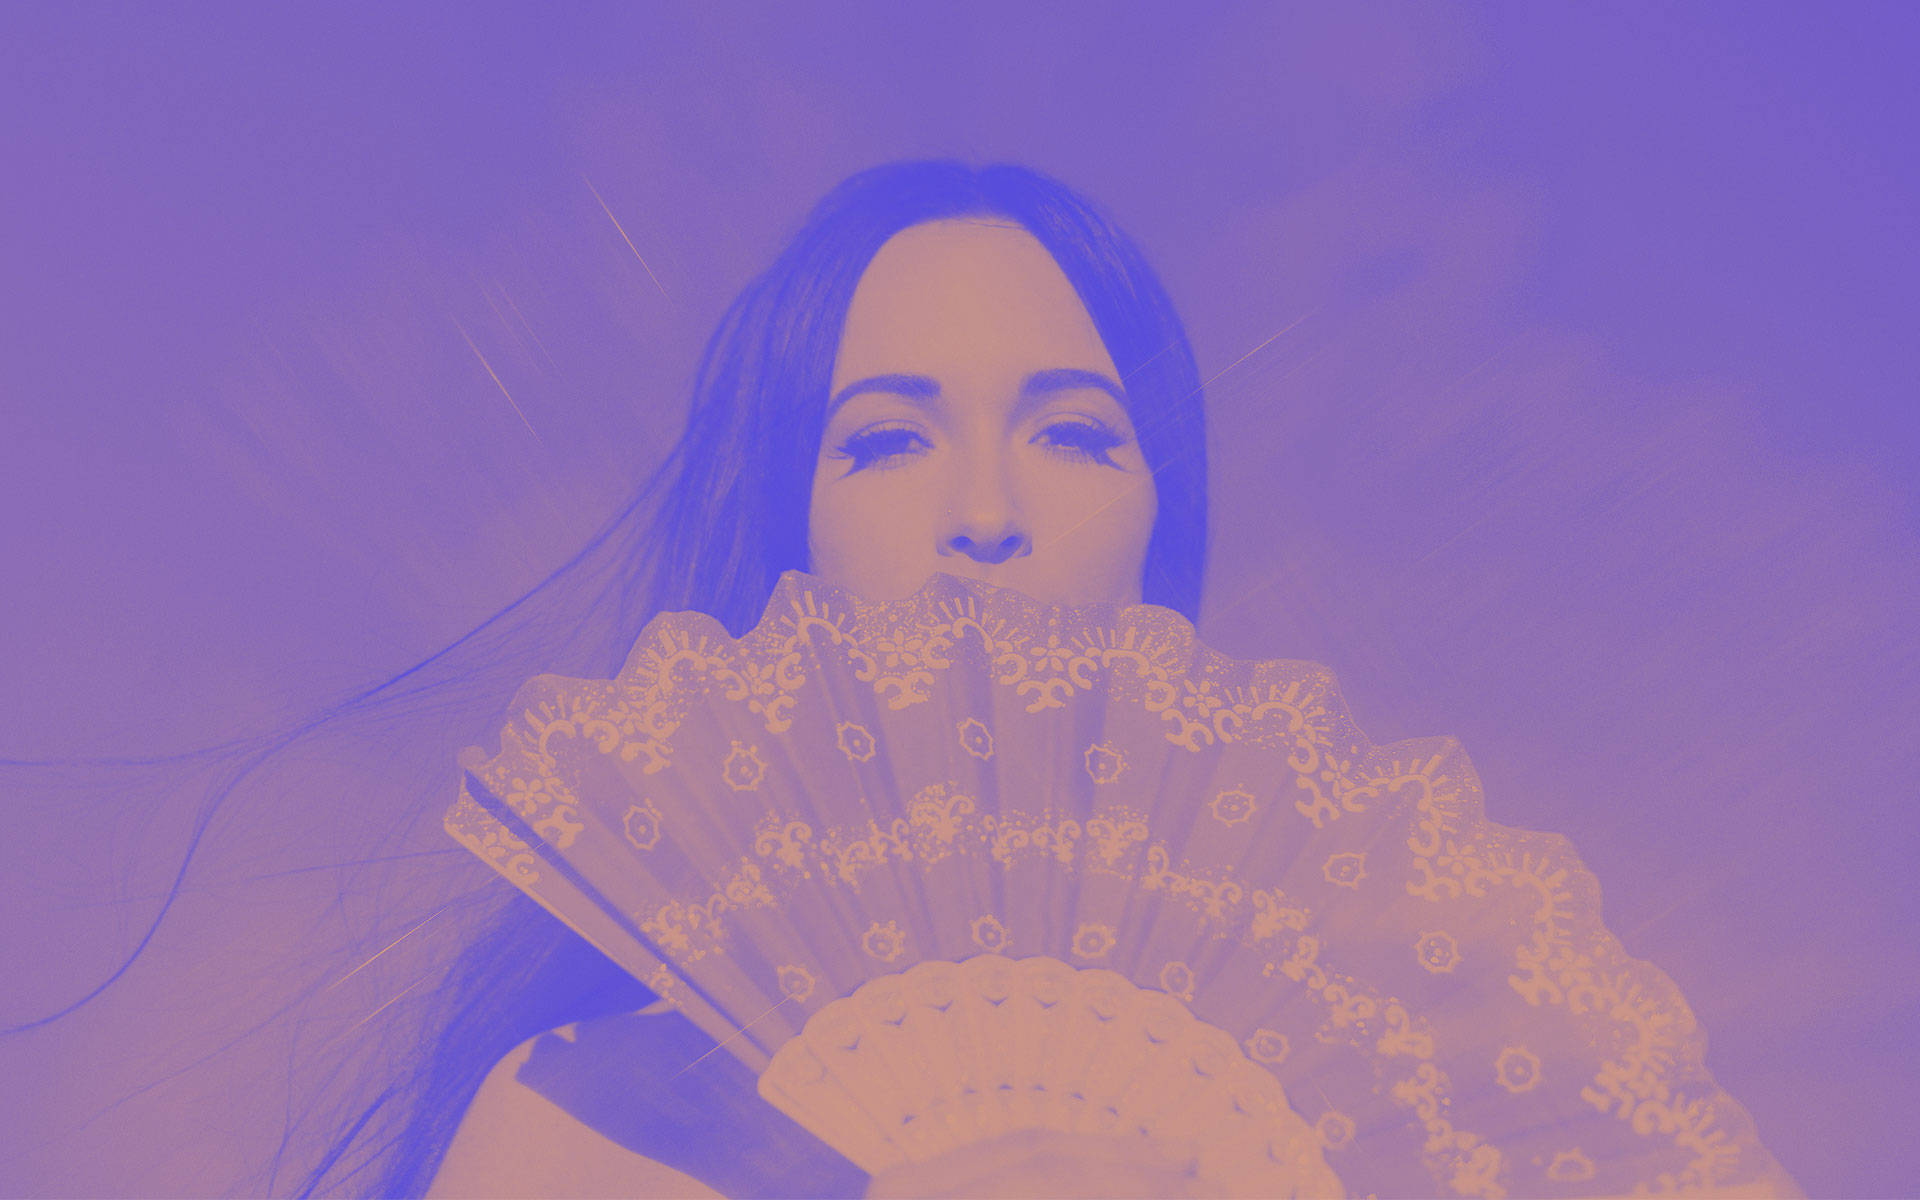 Kacey Musgraves Purple Album Cover Background